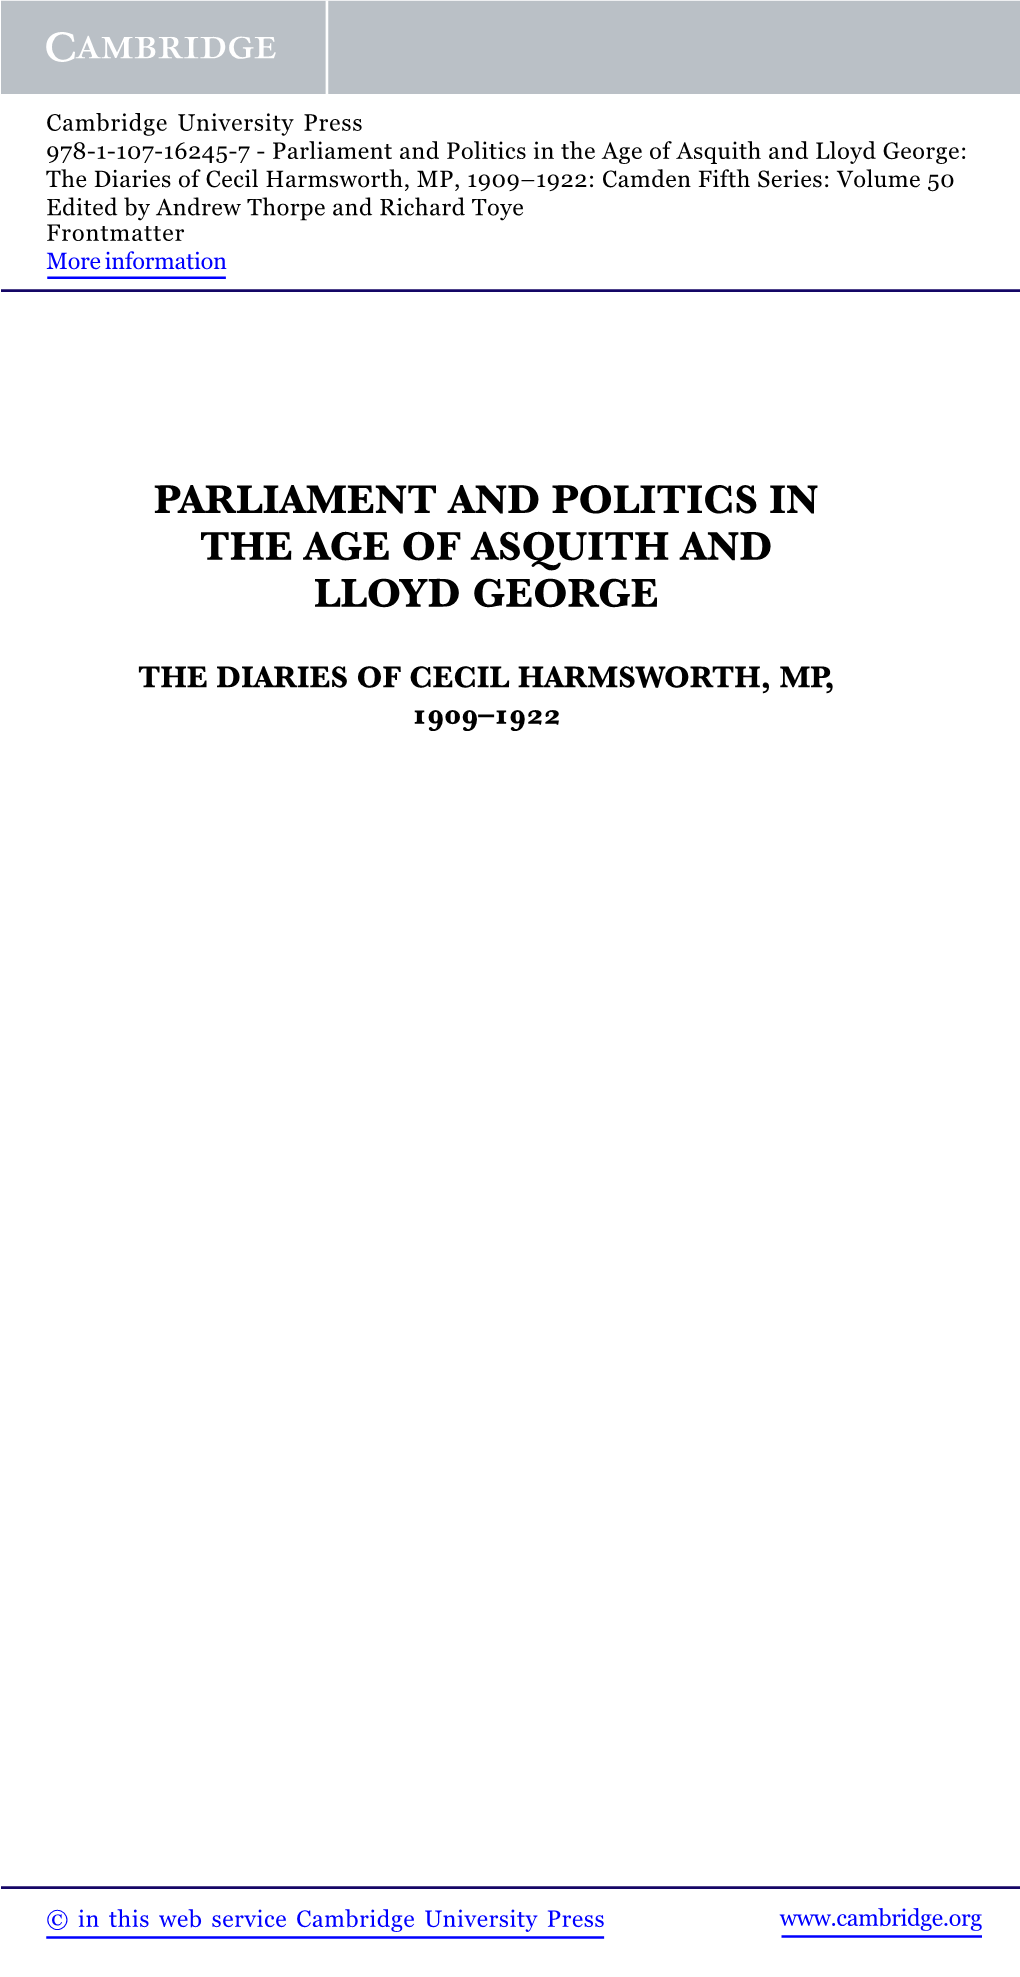 Parliament and Politics in the Age of Asquith and Lloyd